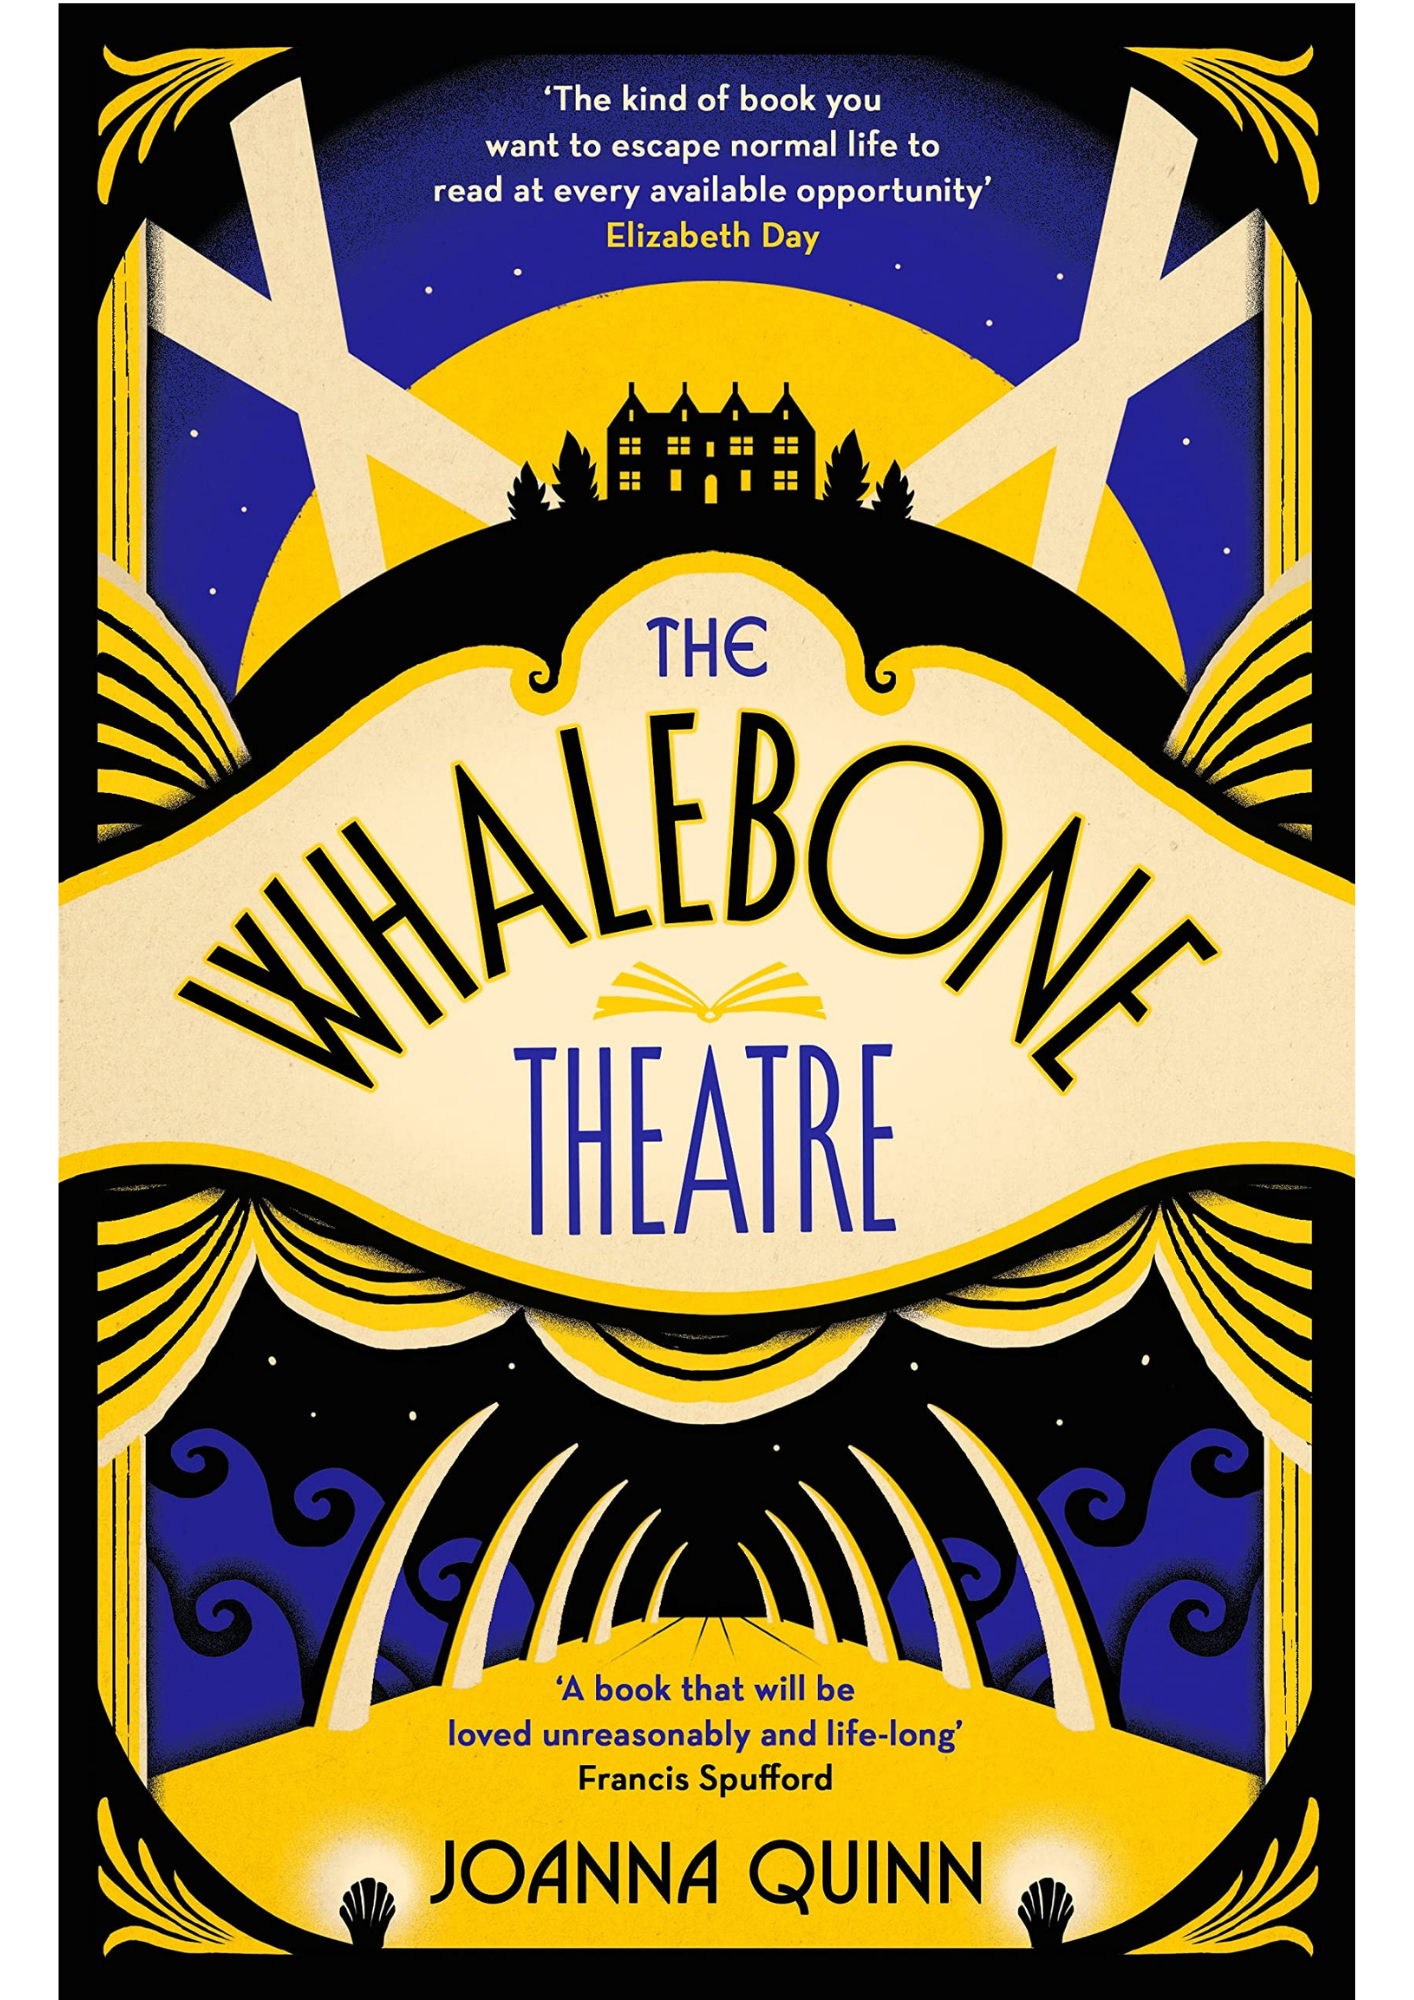 Frome Lit Fest: The Whalebone Theatre with Joanna Quinn